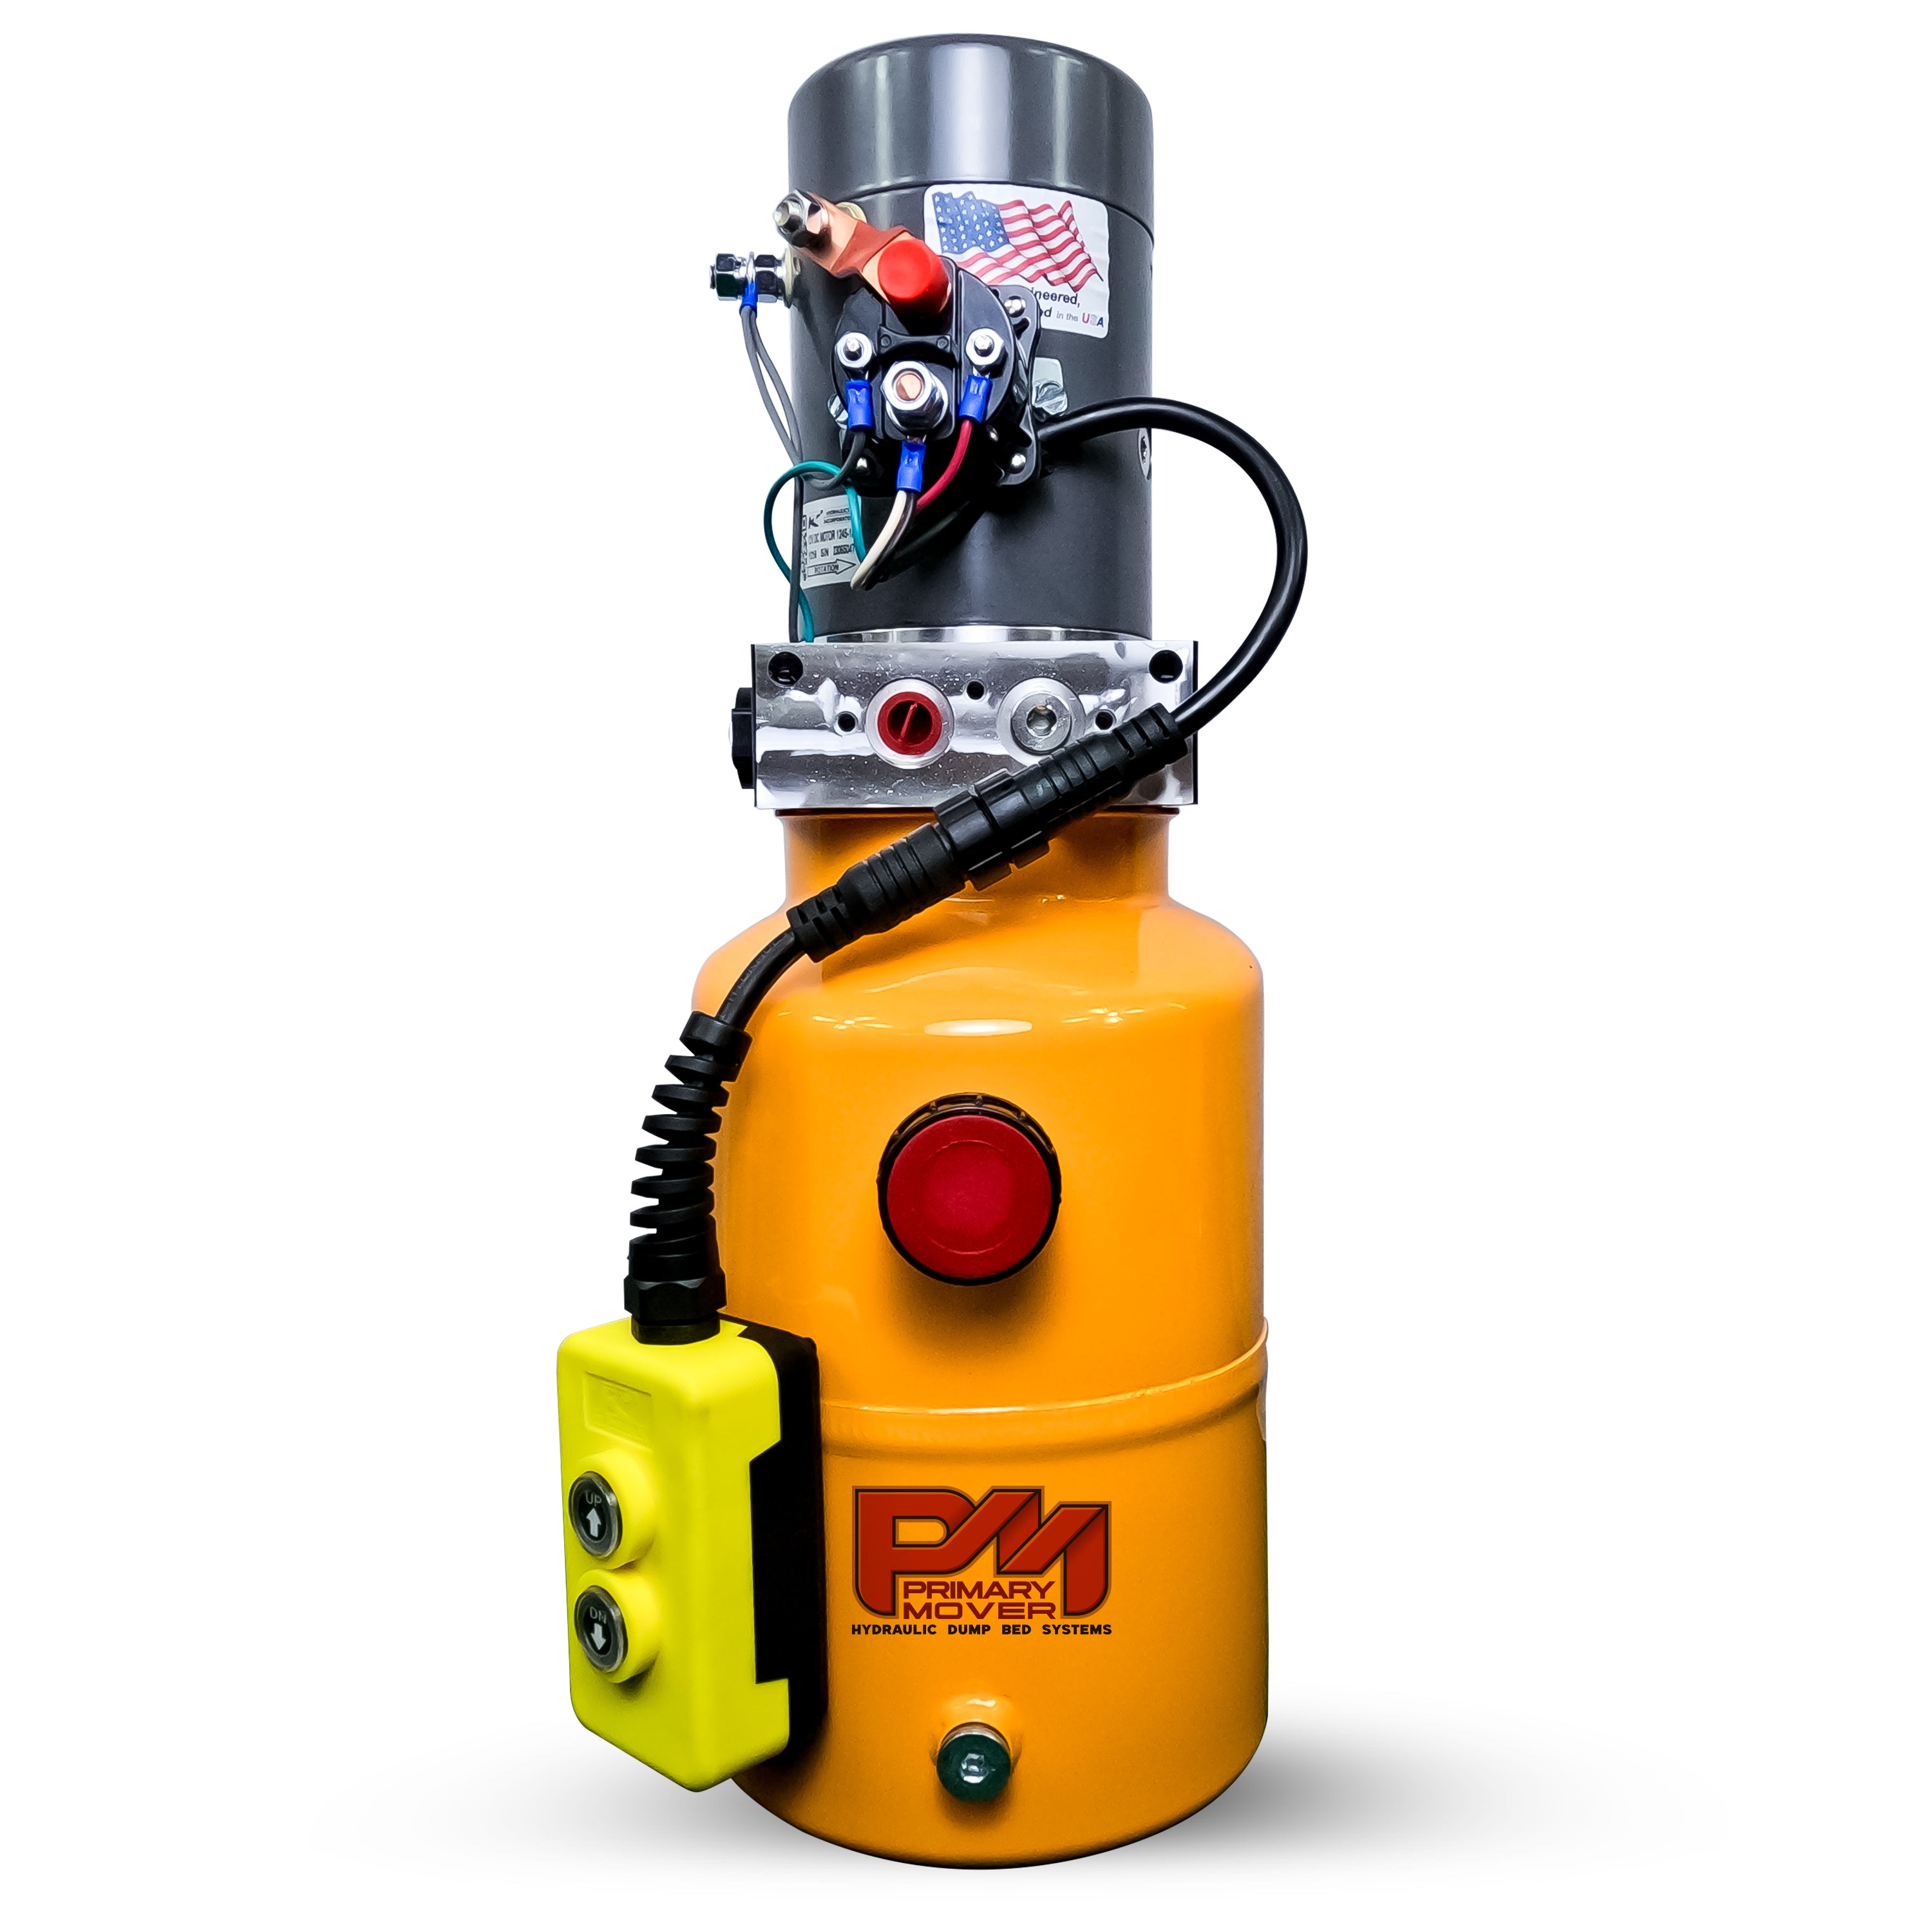 KTI 12V Single-Acting Hydraulic Pump with a steel reservoir, featuring a red button and black wires, designed for efficient dump bed system operations.